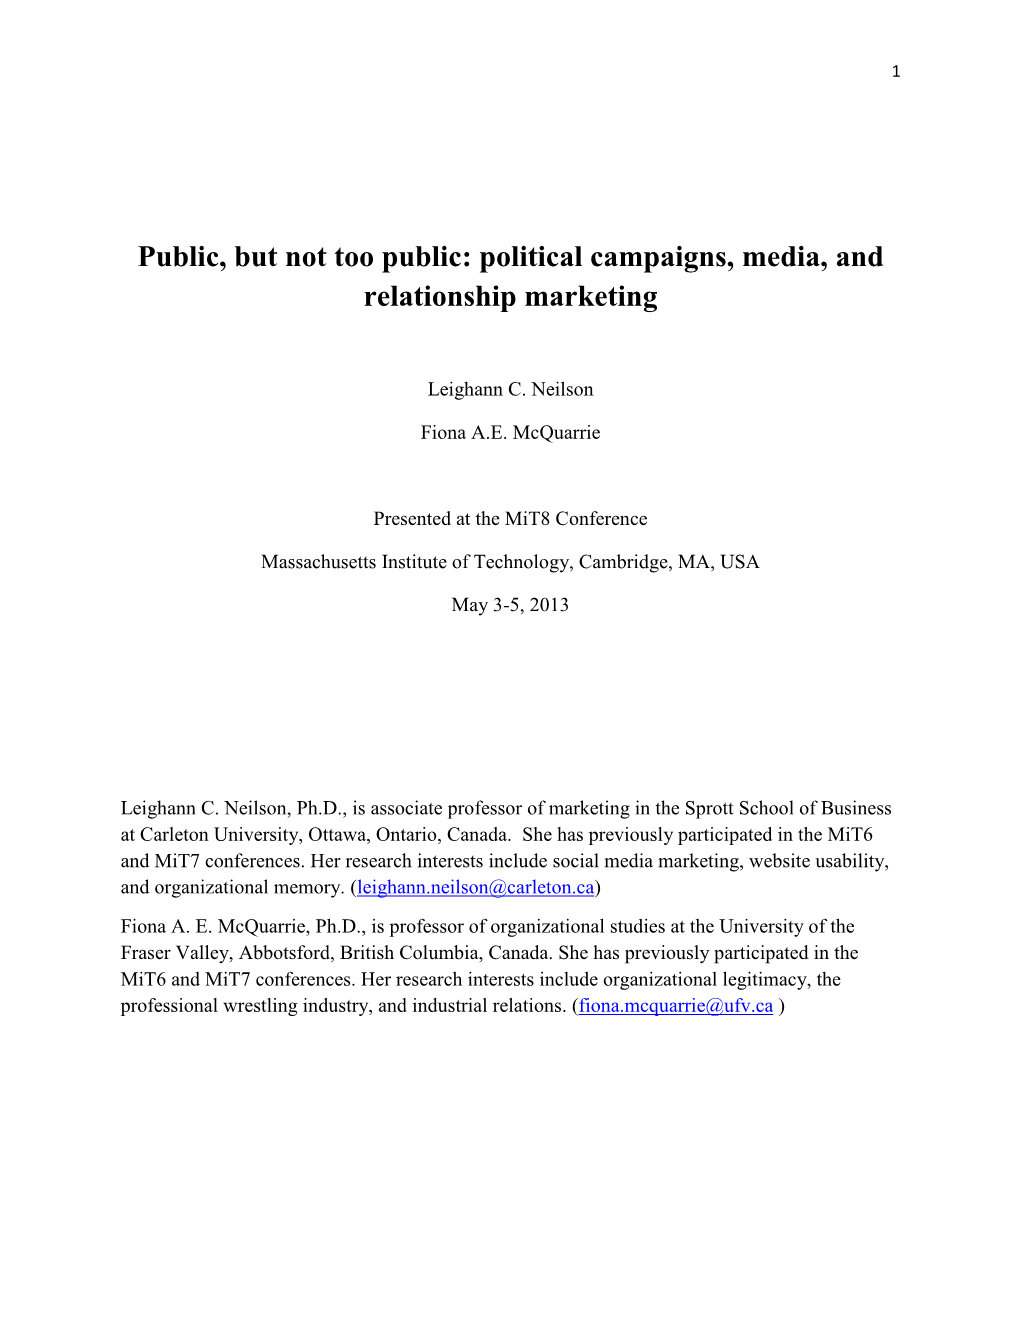 Political Campaigns, Media, and Relationship Marketing